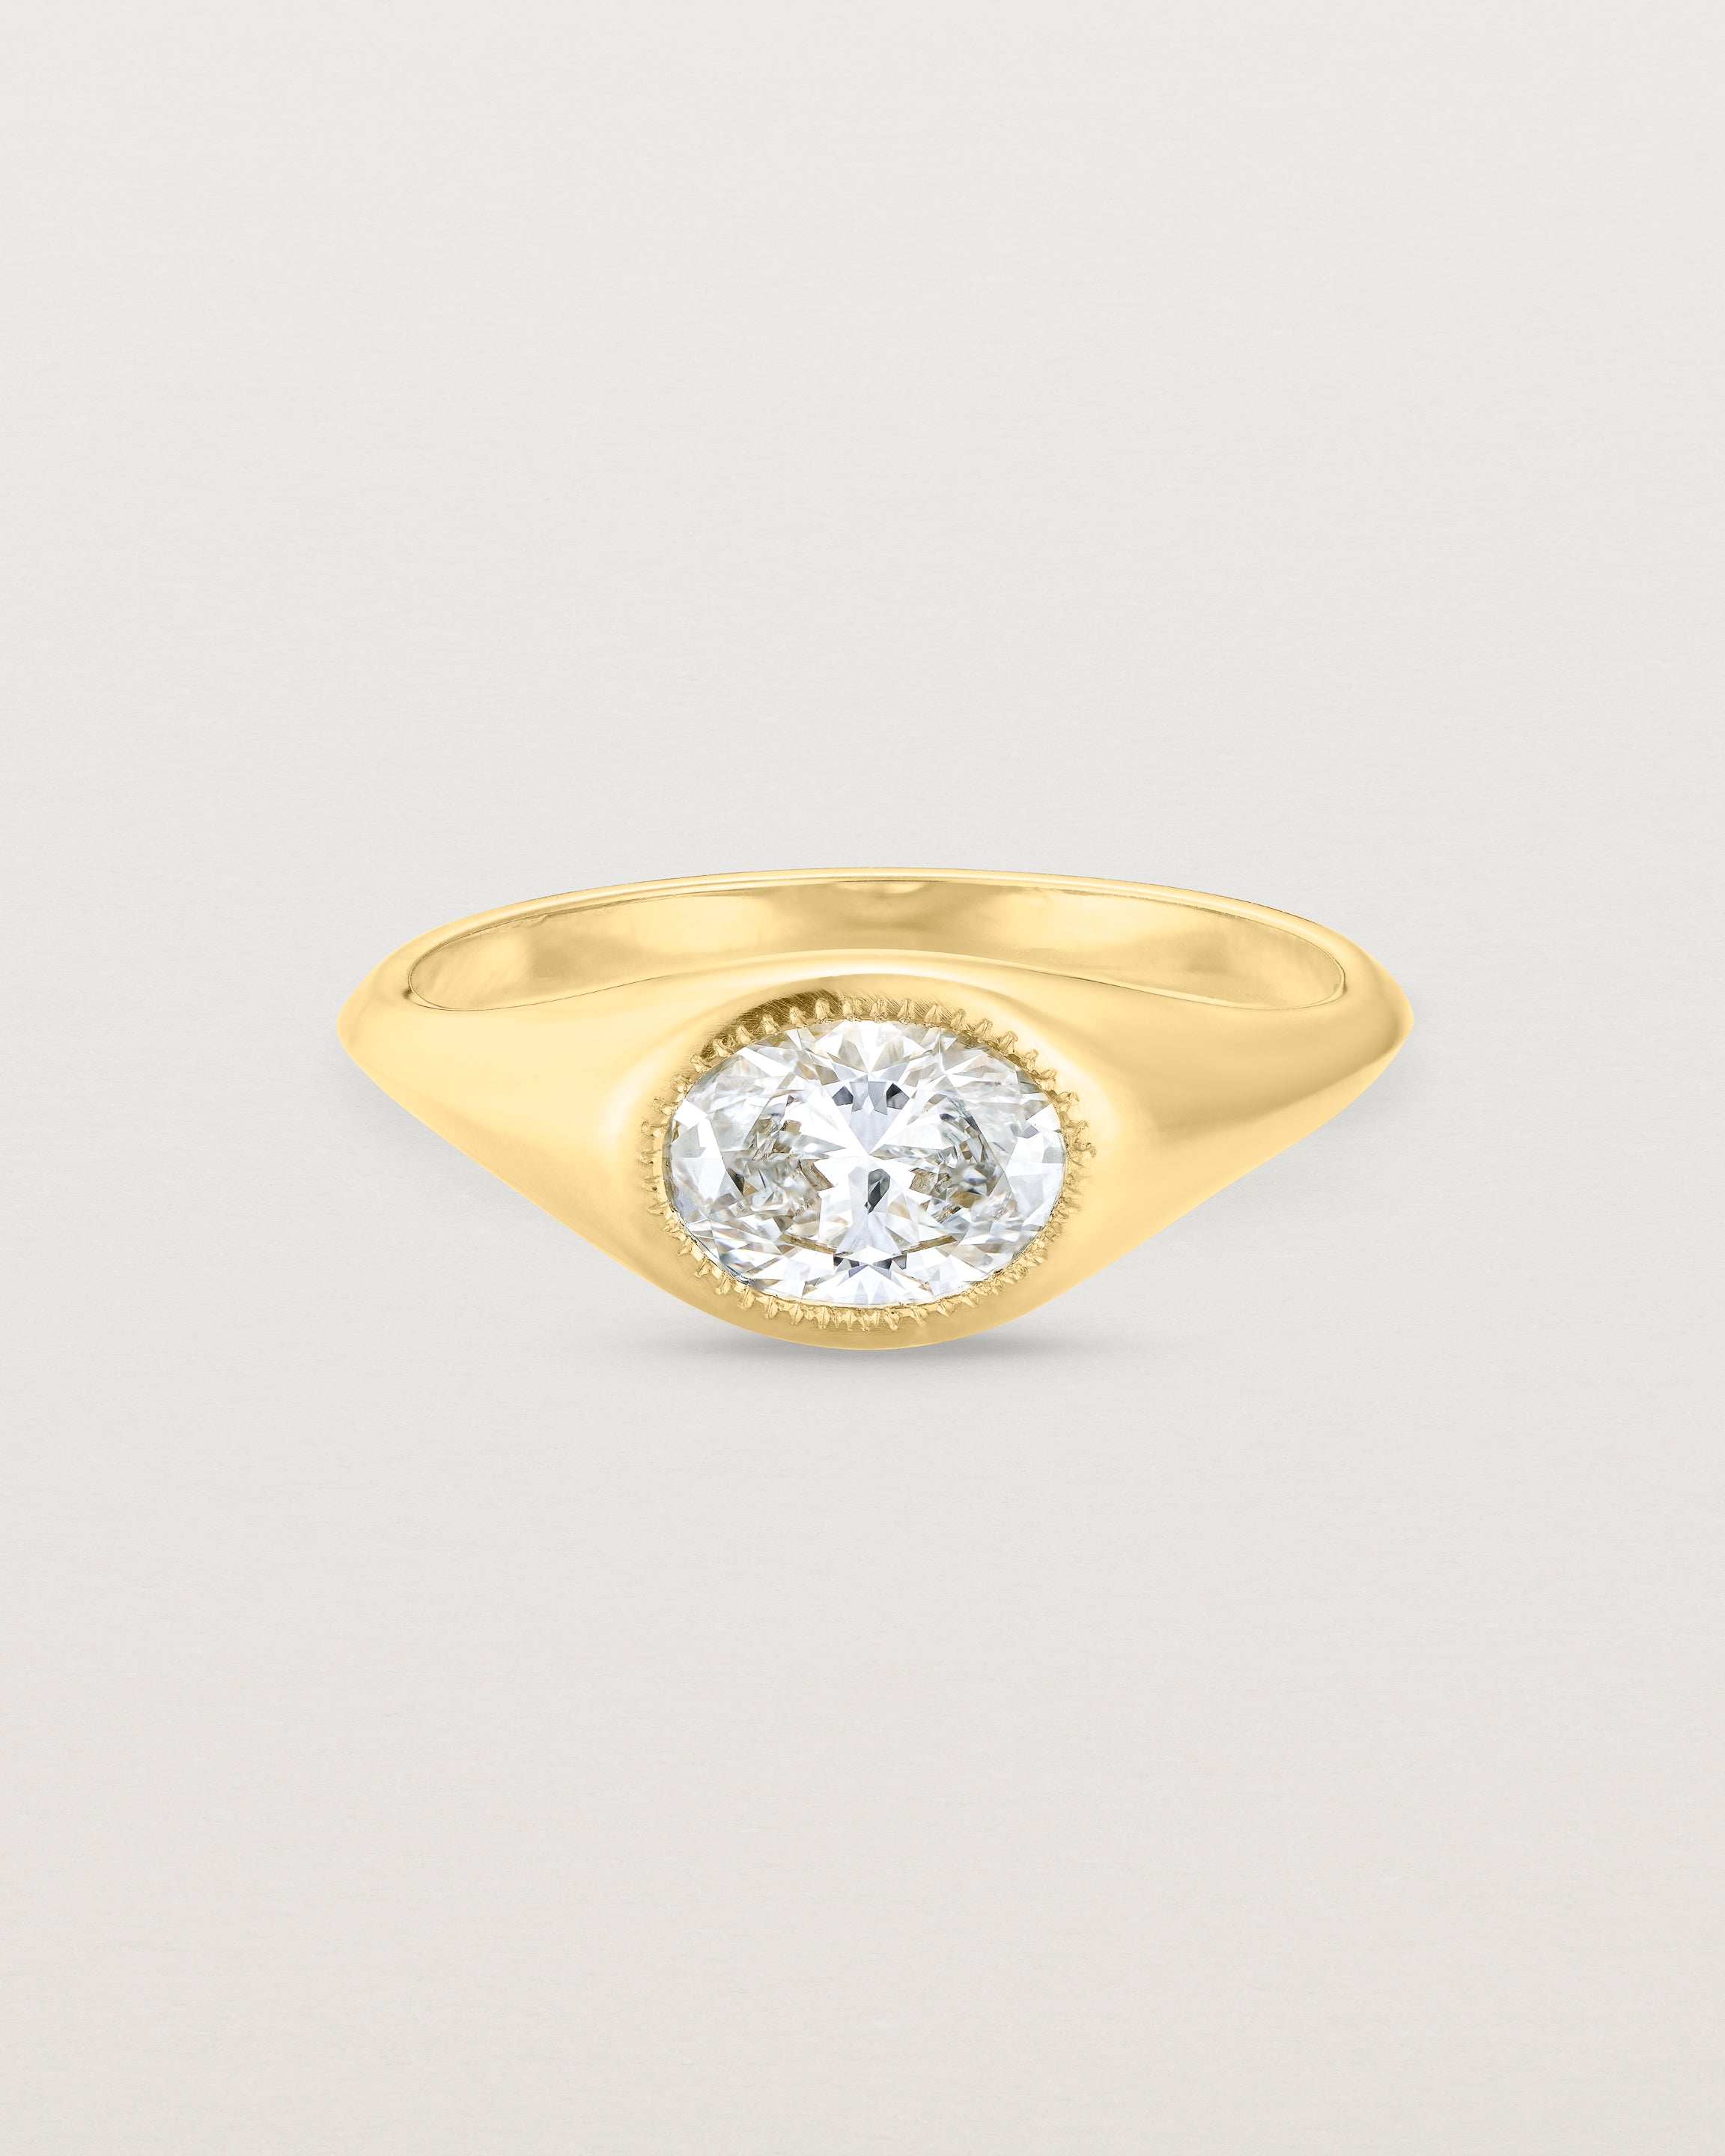 Front view of the Átlas Oval Signet | Laboratory Grown Diamond in yellow gold, with a polished finish. _label: Polished Finish Example